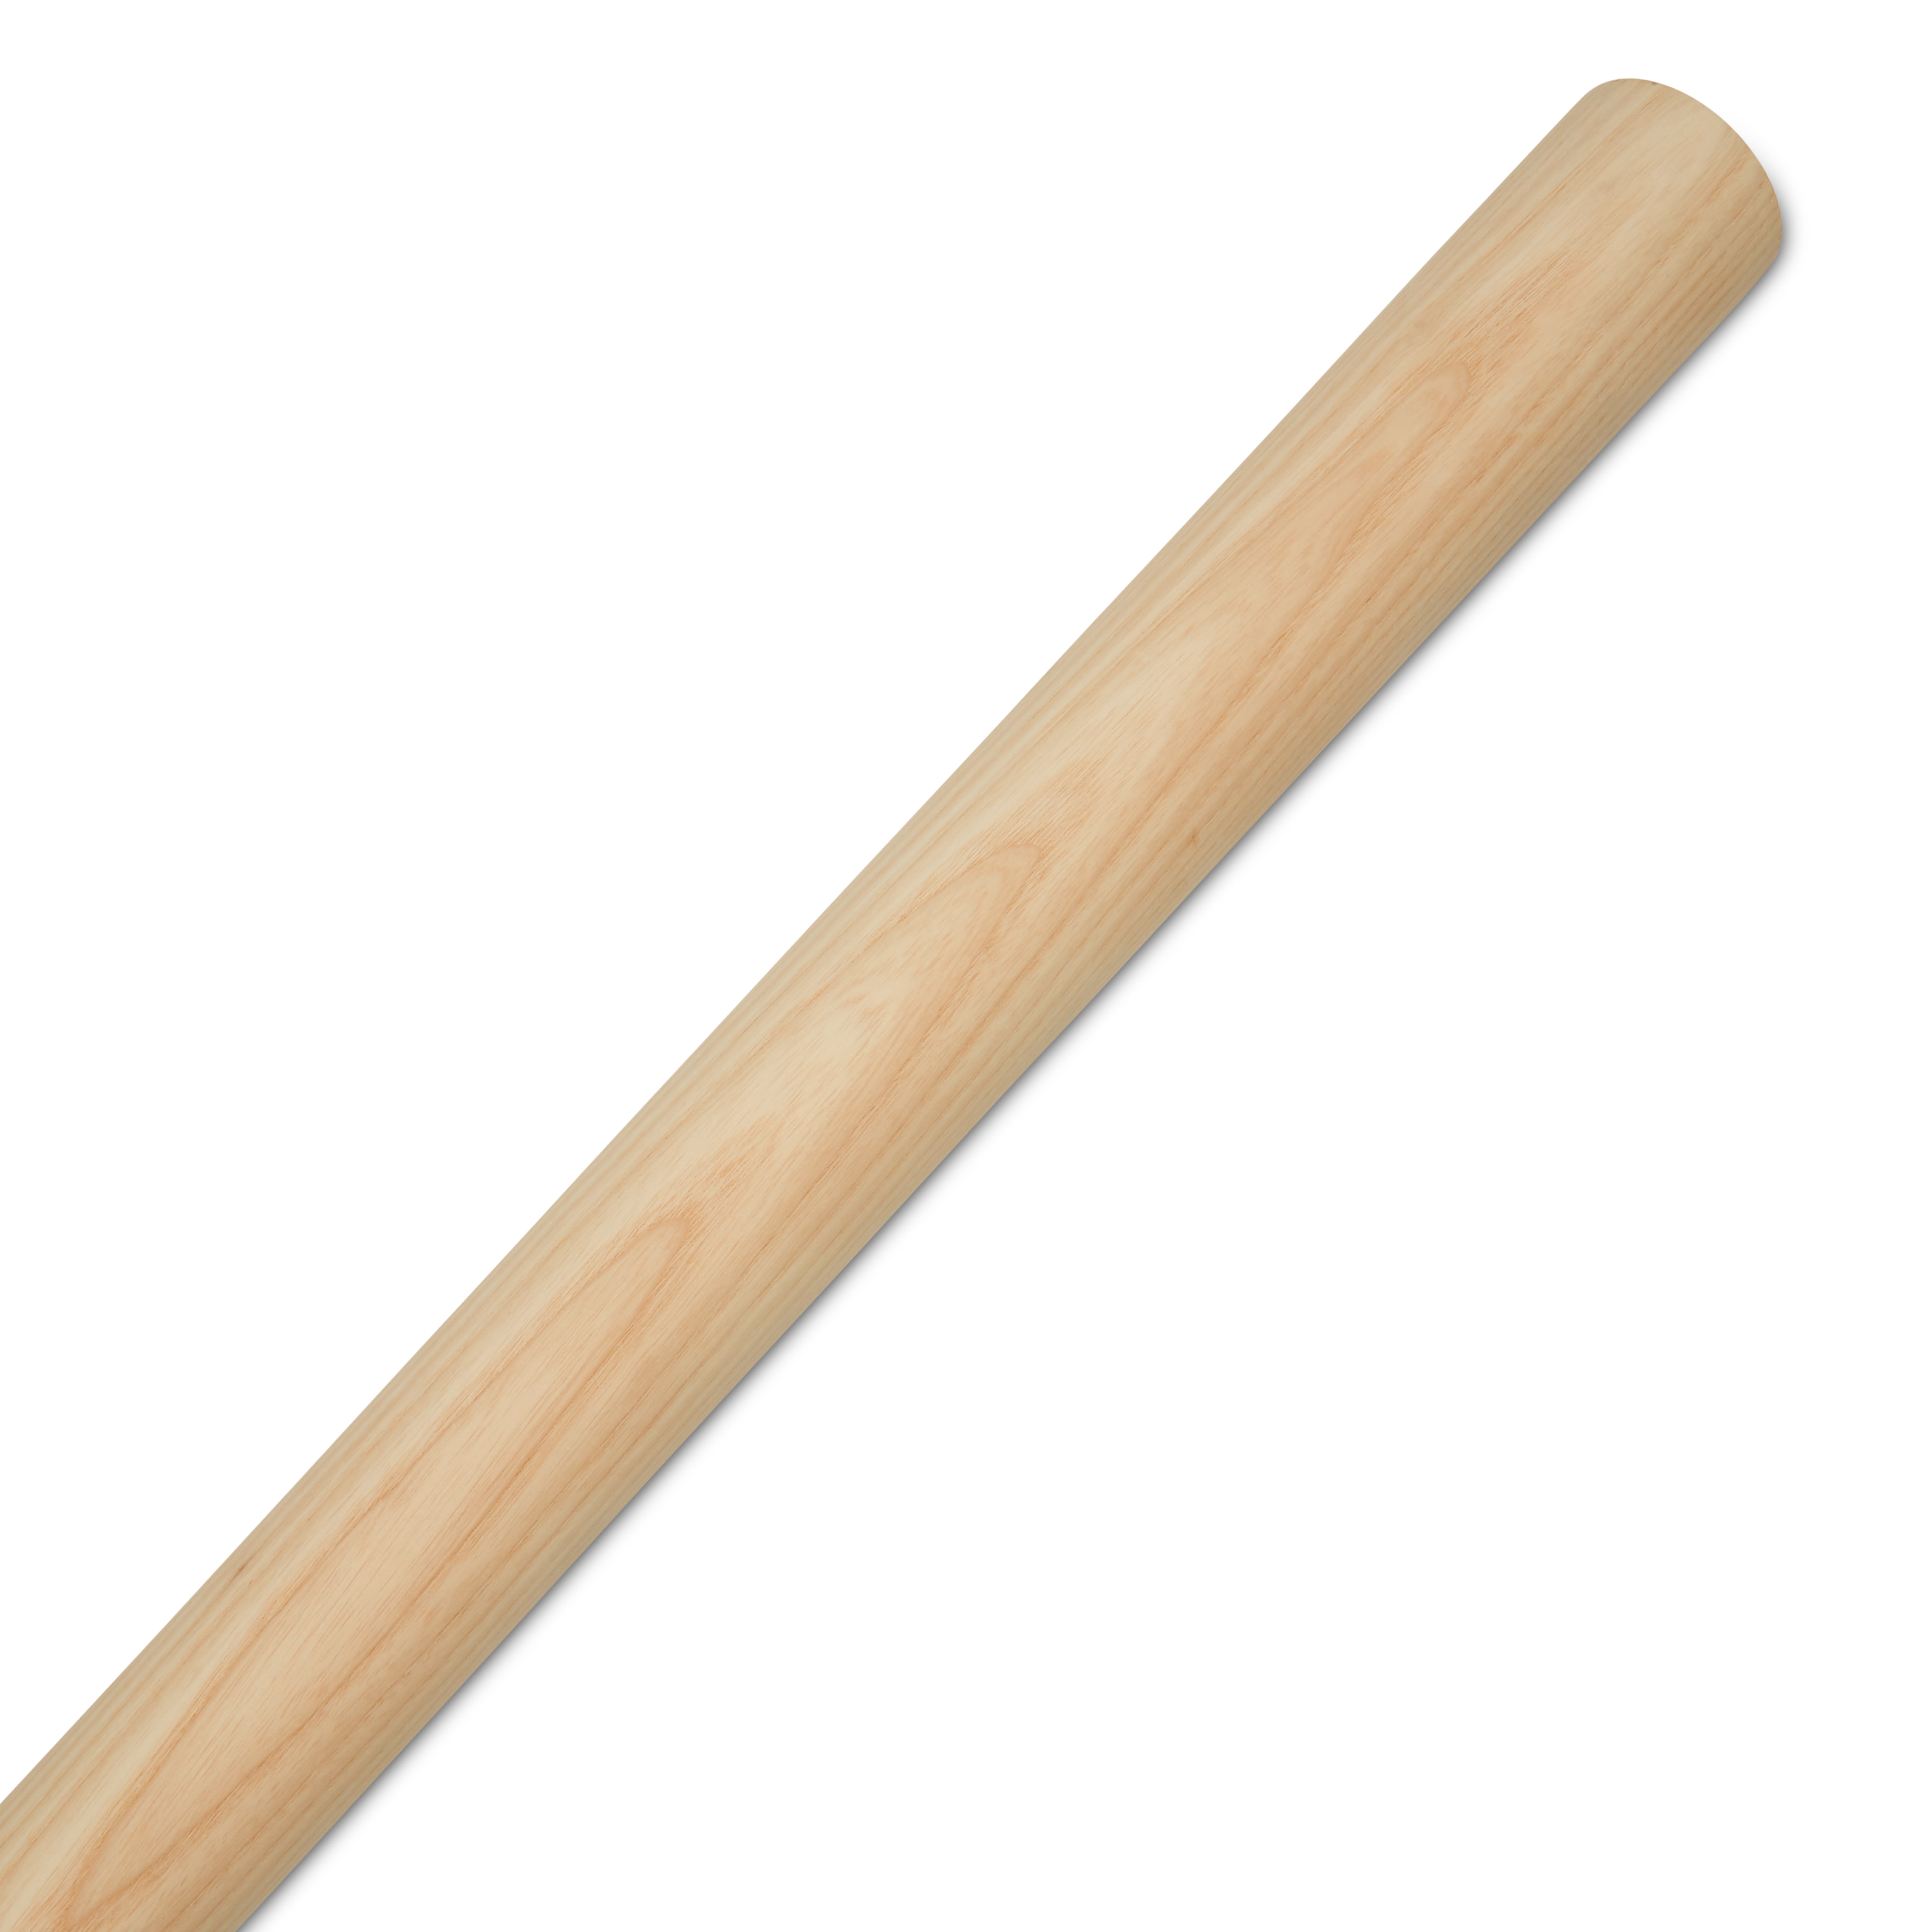  Dowel Rods Wood Sticks Wooden Dowel Rods - 3/16 x 6 Inch  Unfinished Hardwood Sticks - for Crafts and DIYers - 50 Pieces by  Woodpeckers